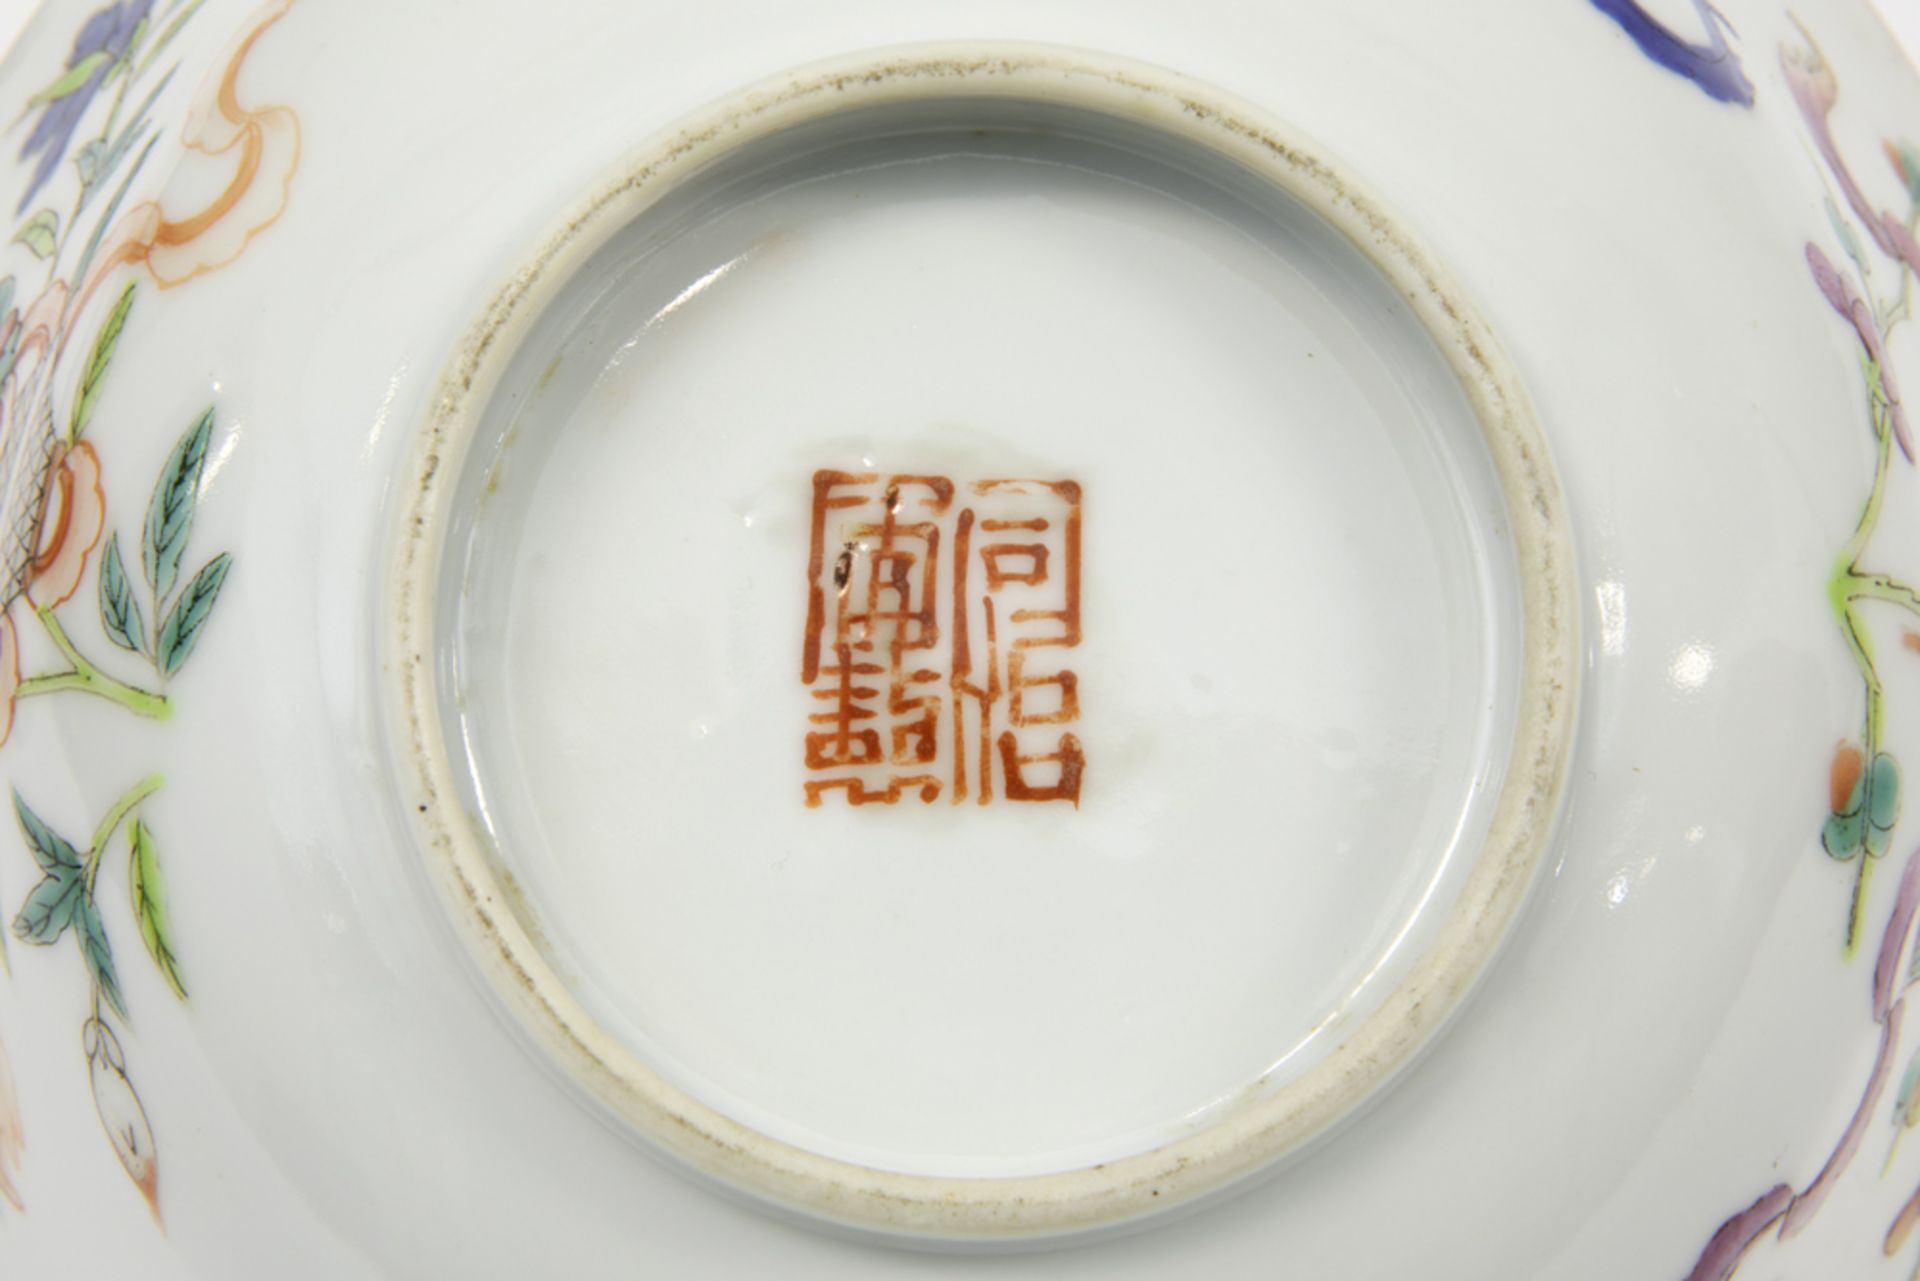 19th Cent. Chinese bowl in Hsien Feng (Xian Feng) marked porcelain with a polychrome decor || - Image 7 of 7